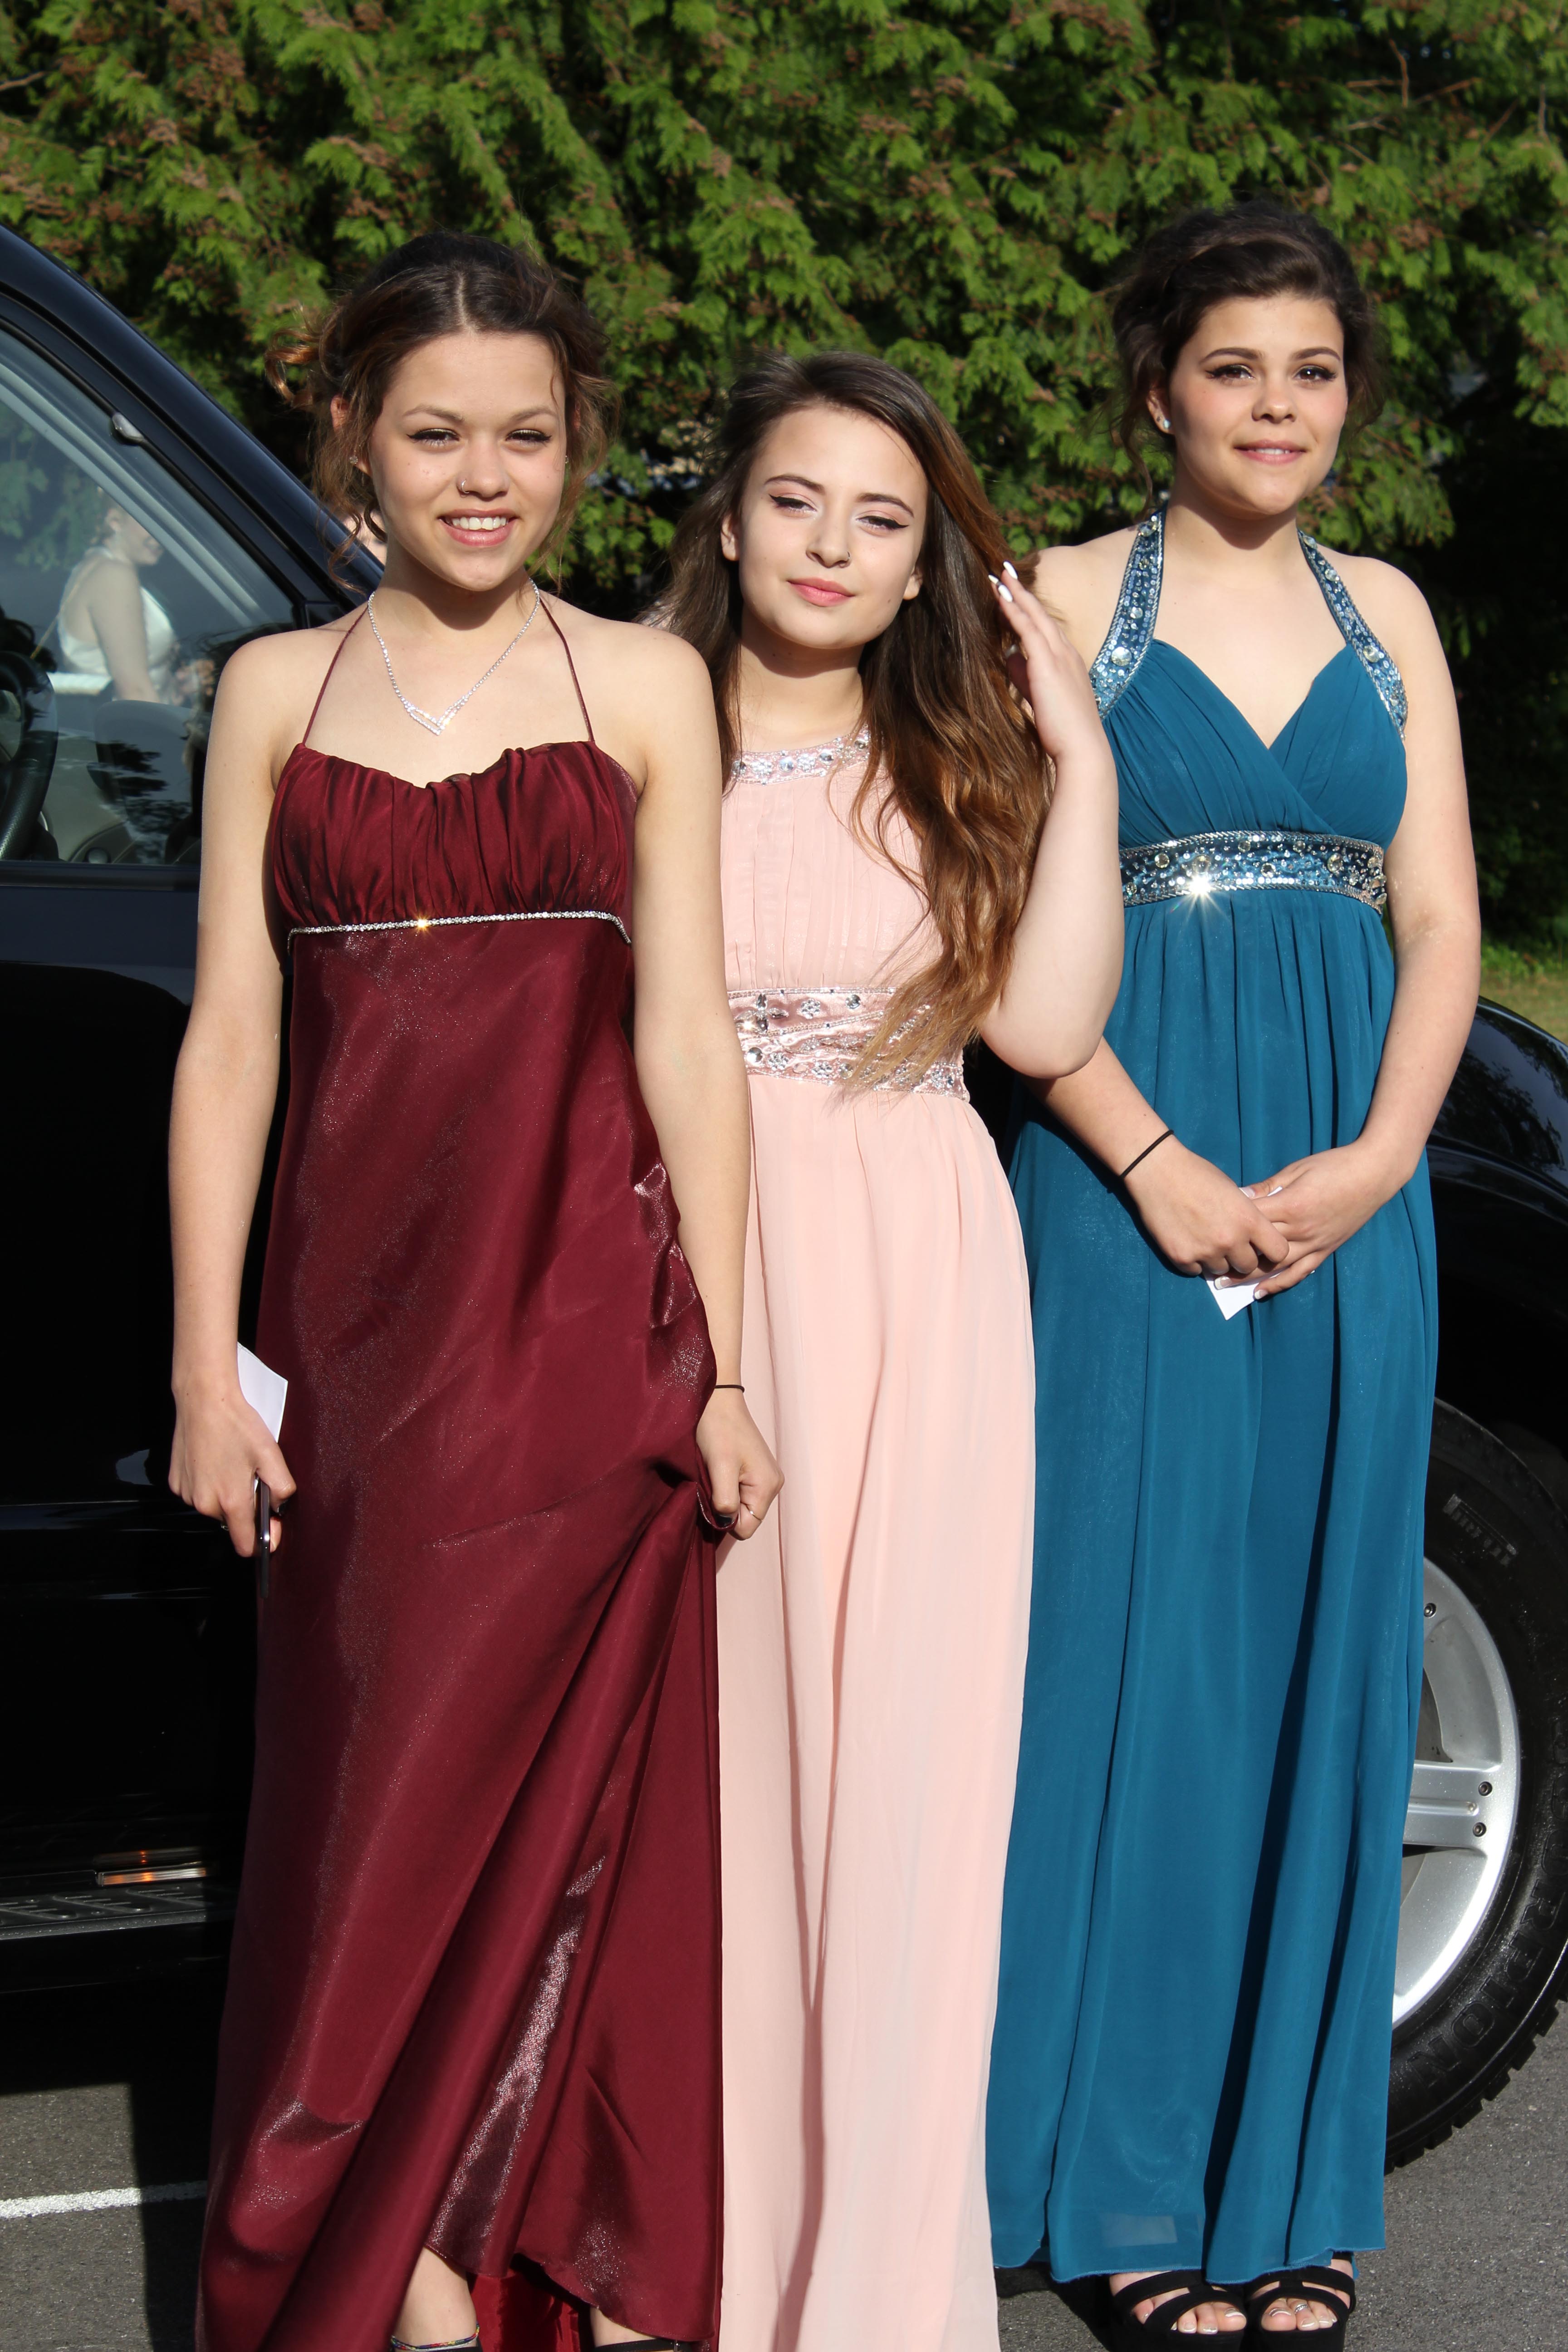 Snapped: College @ 14 Students Celebrate First Prom